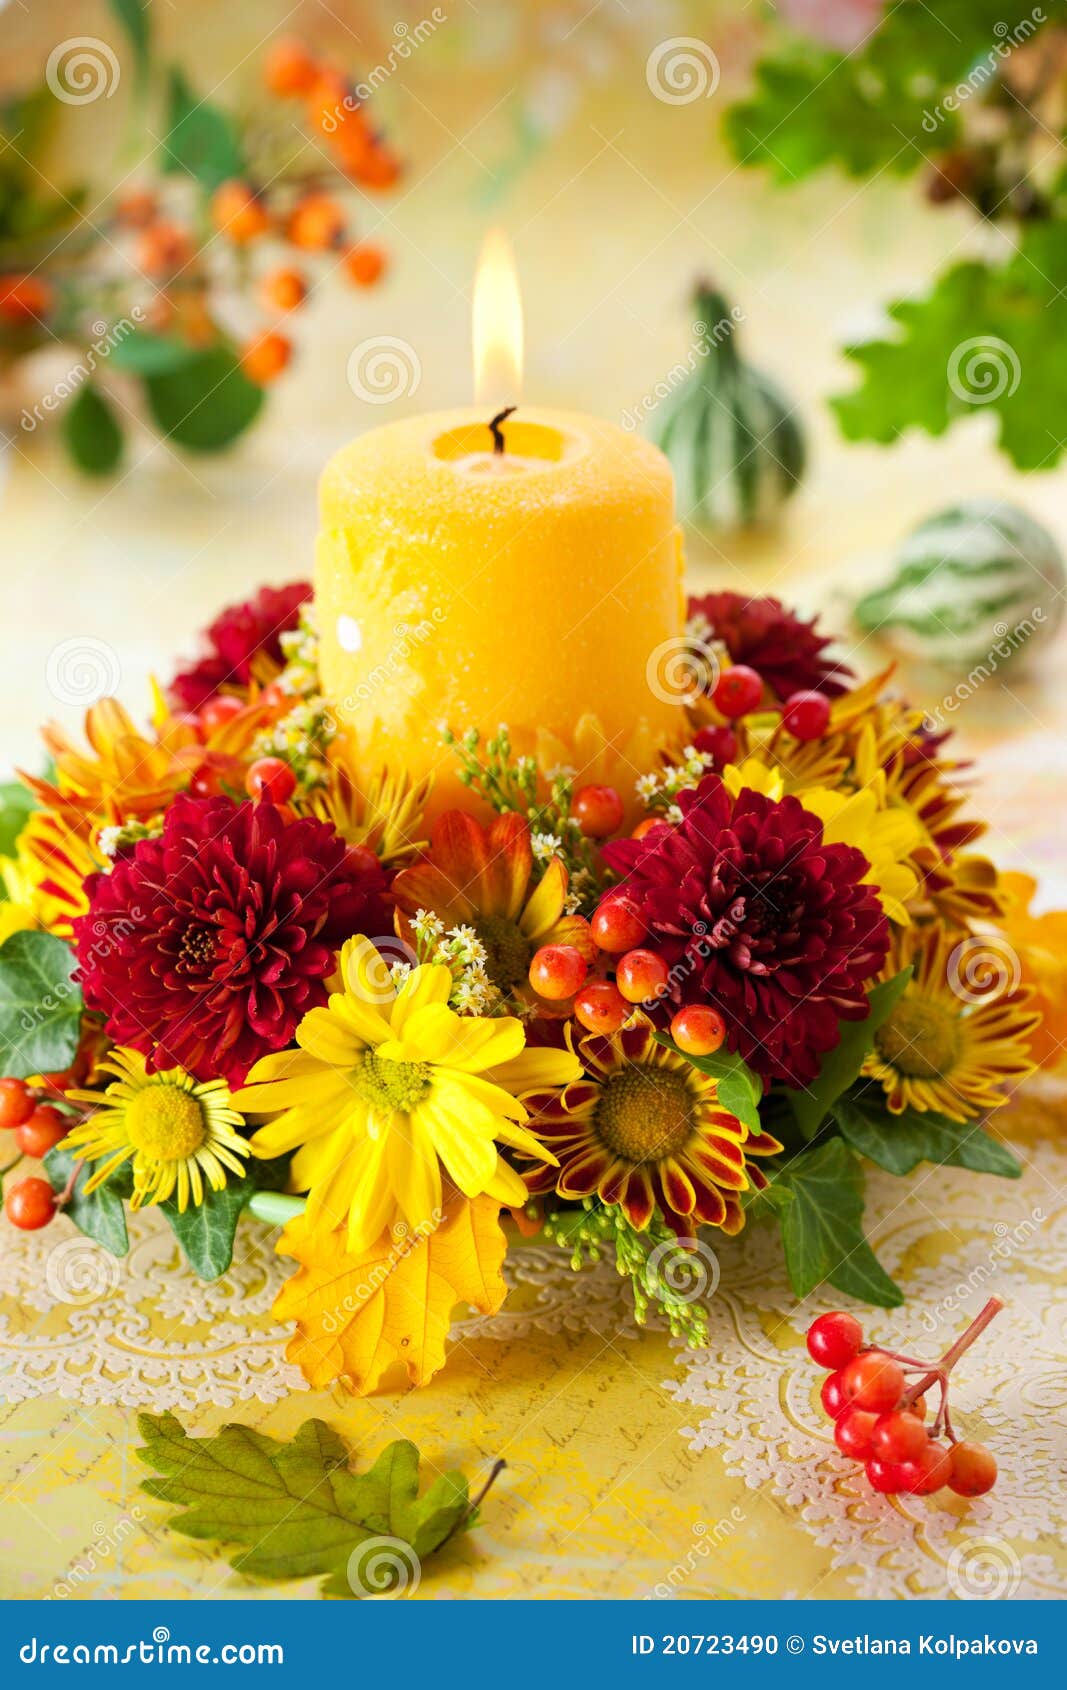 Wreath Of Autumn Flowers And Candle Stock Photo  Image 